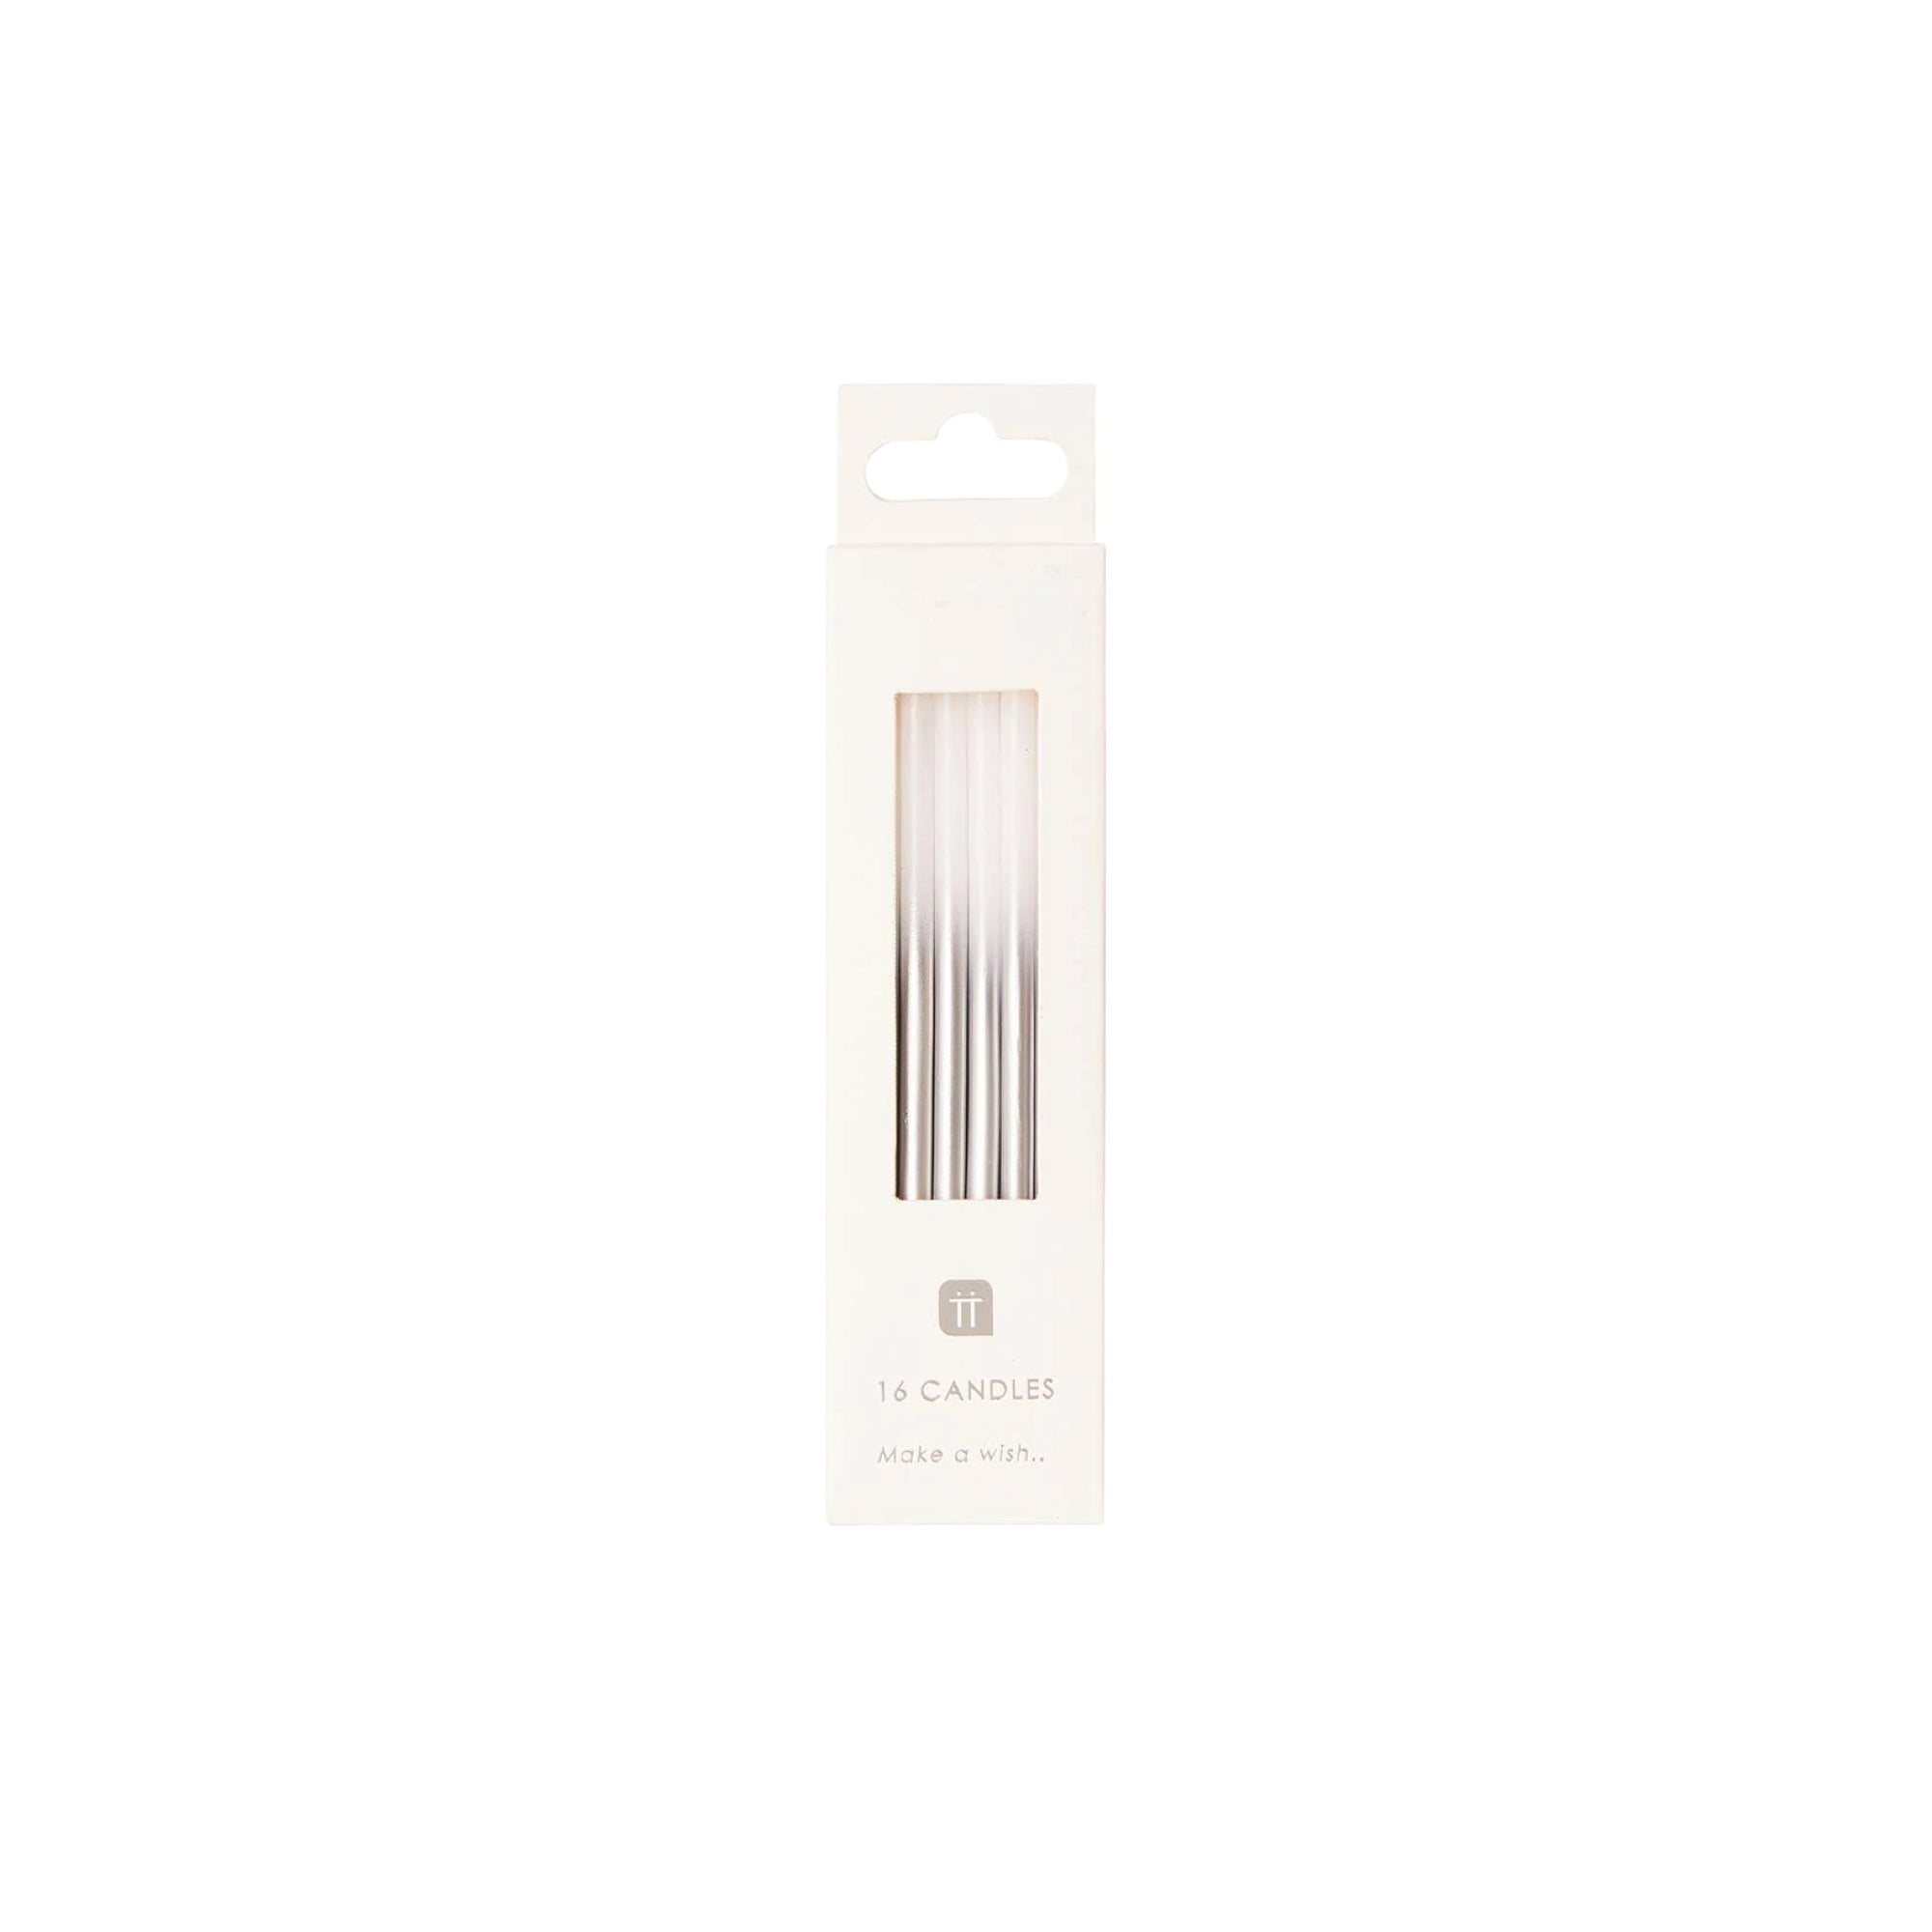 Silver Ombre Birthday Candles 16ct | The Party Darling